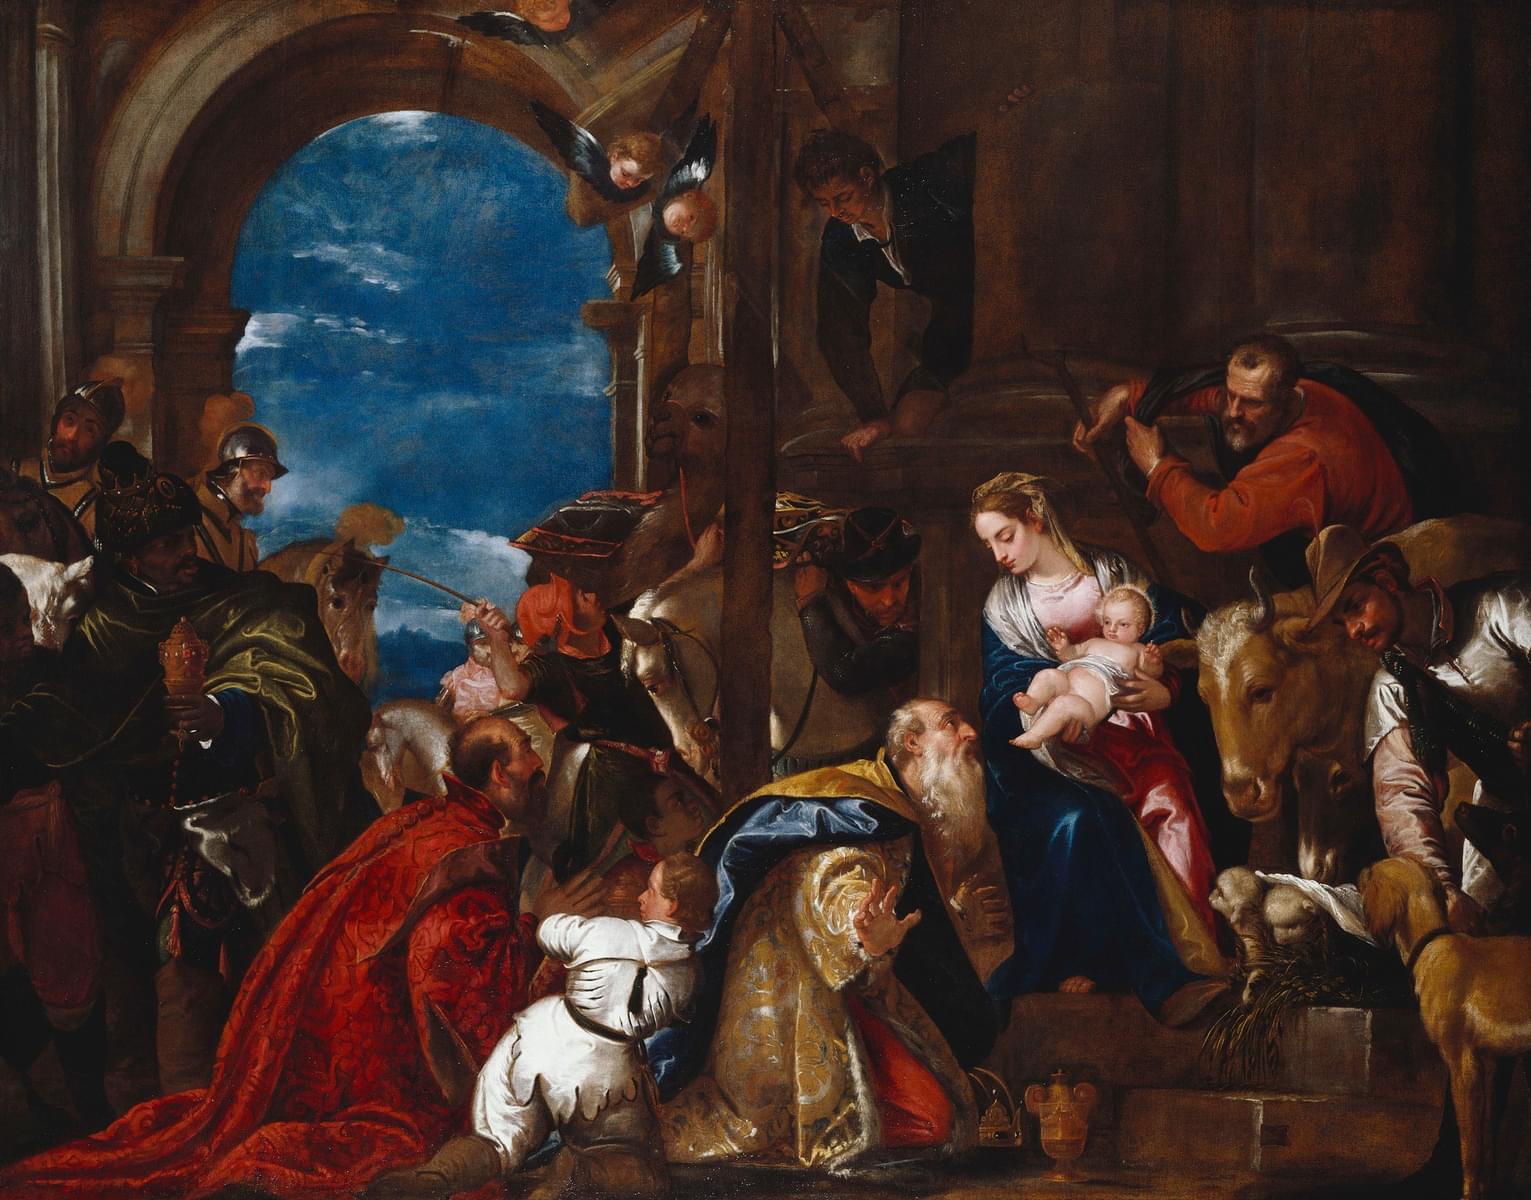 You can see The Adoration of Kings by Paolo Veronese in Royal Collection of Windsor